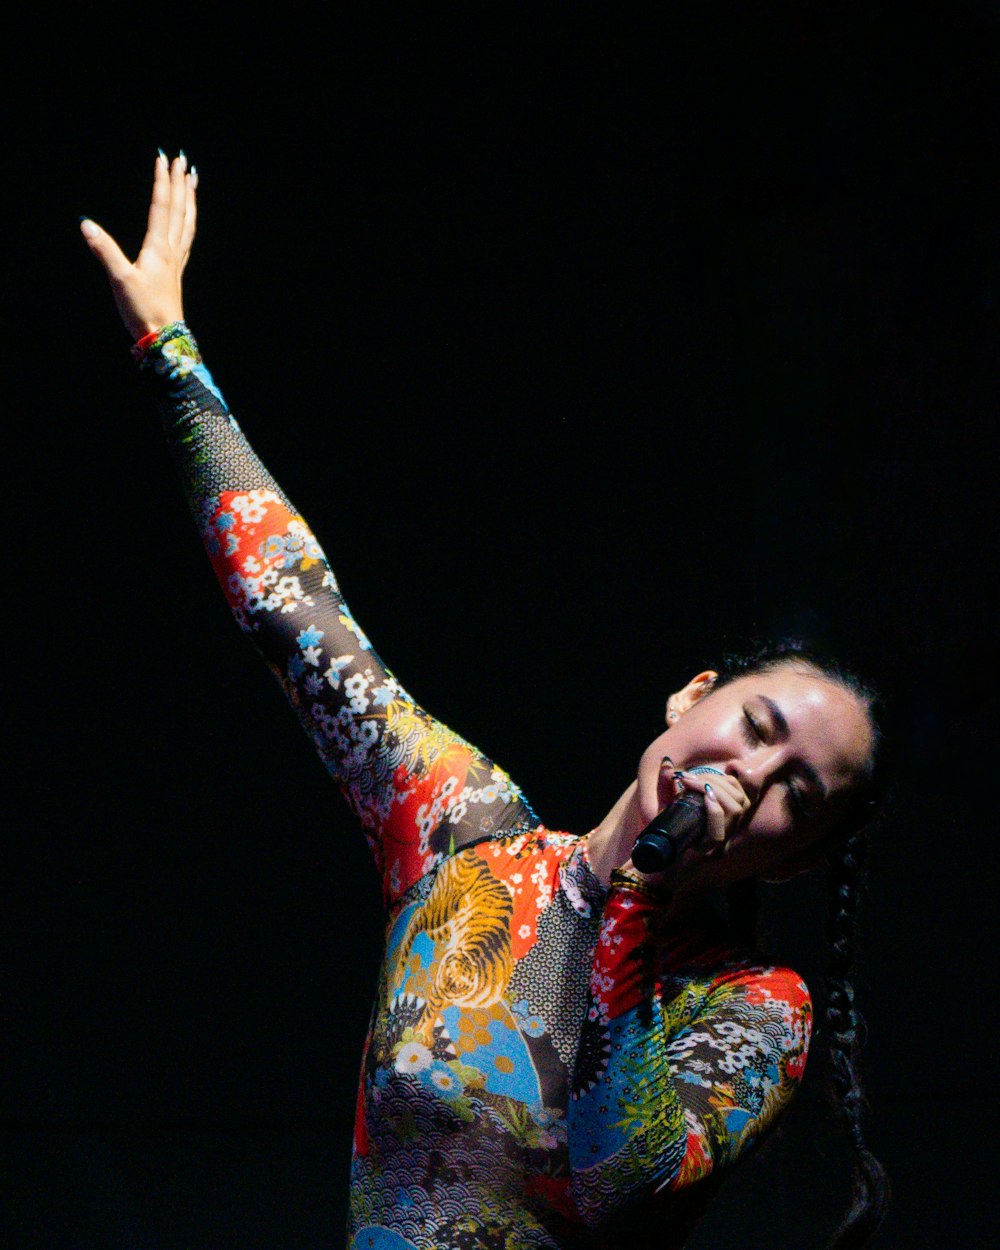 a woman in a colorful outfit holding a microphone